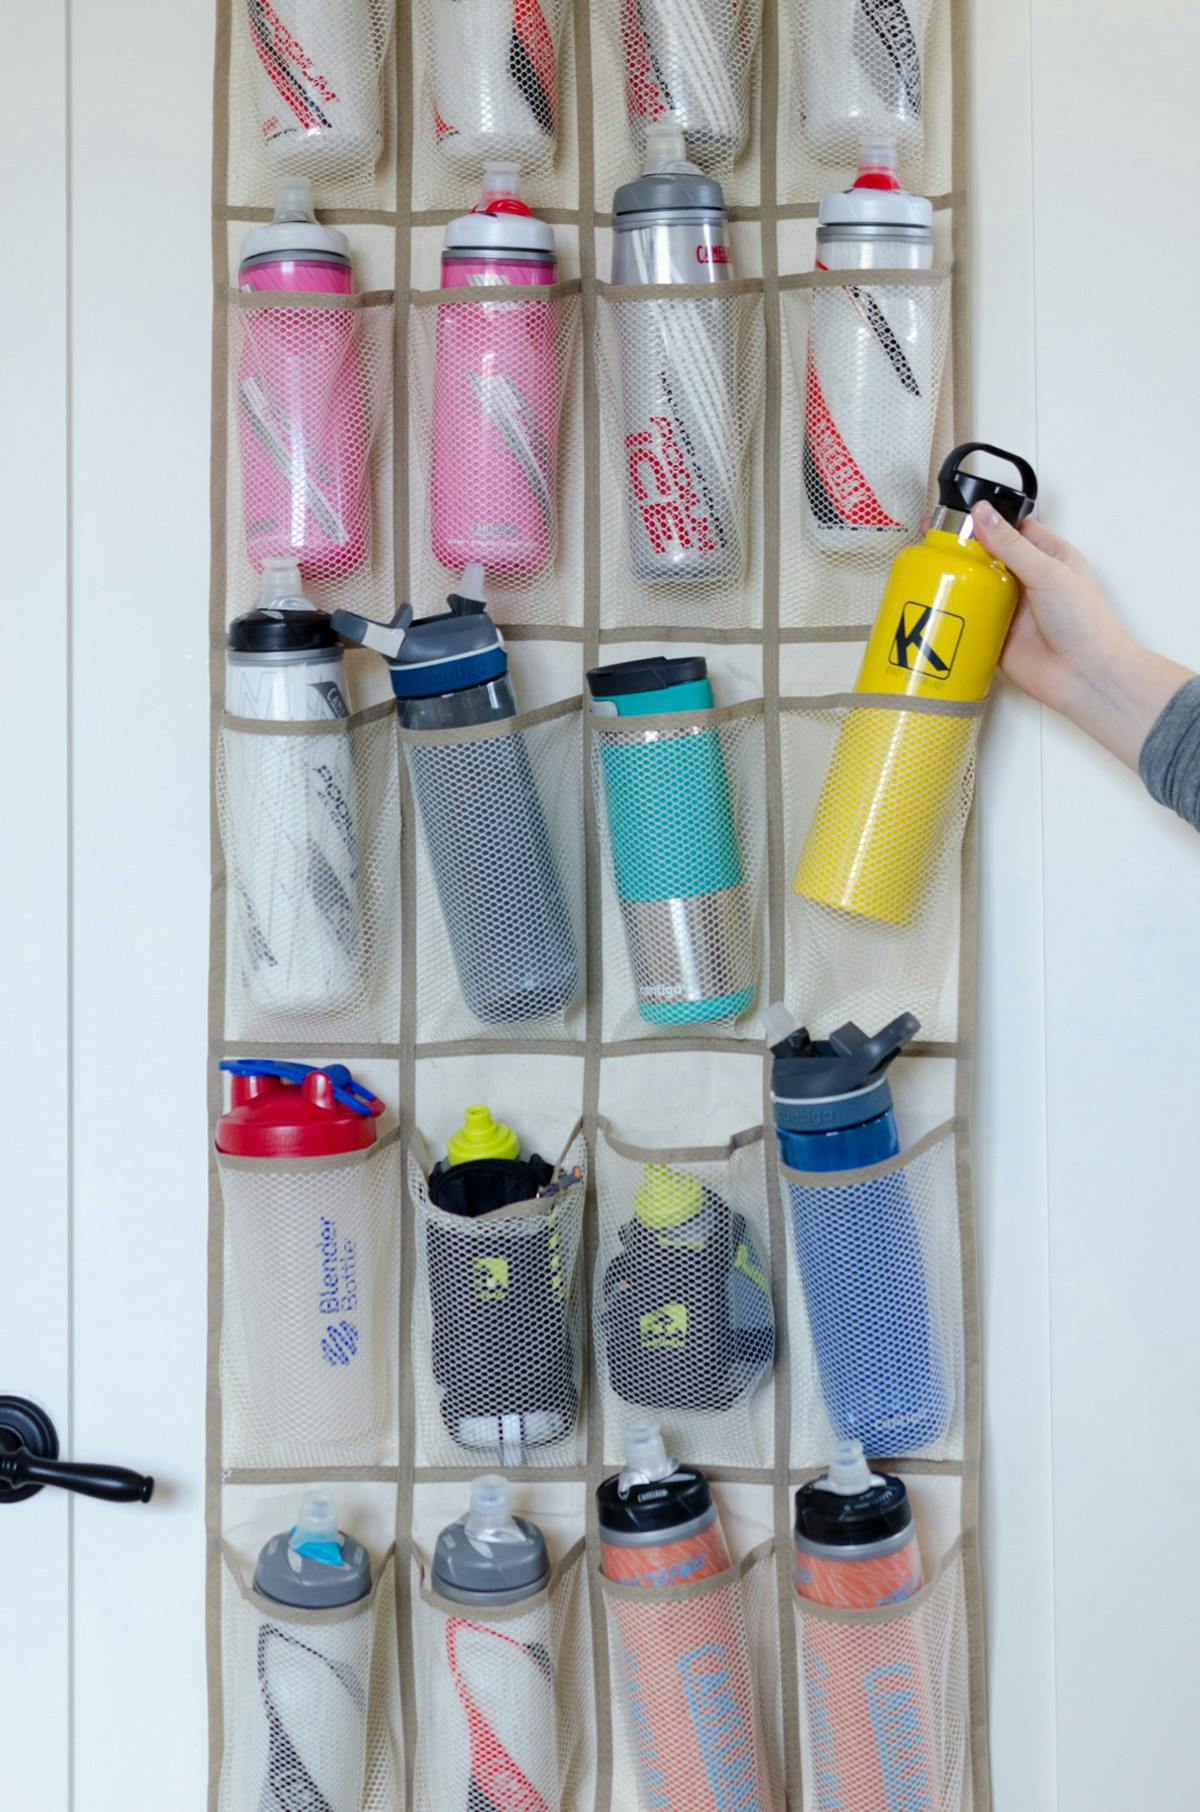 Use it in your pantry to store water bottles.